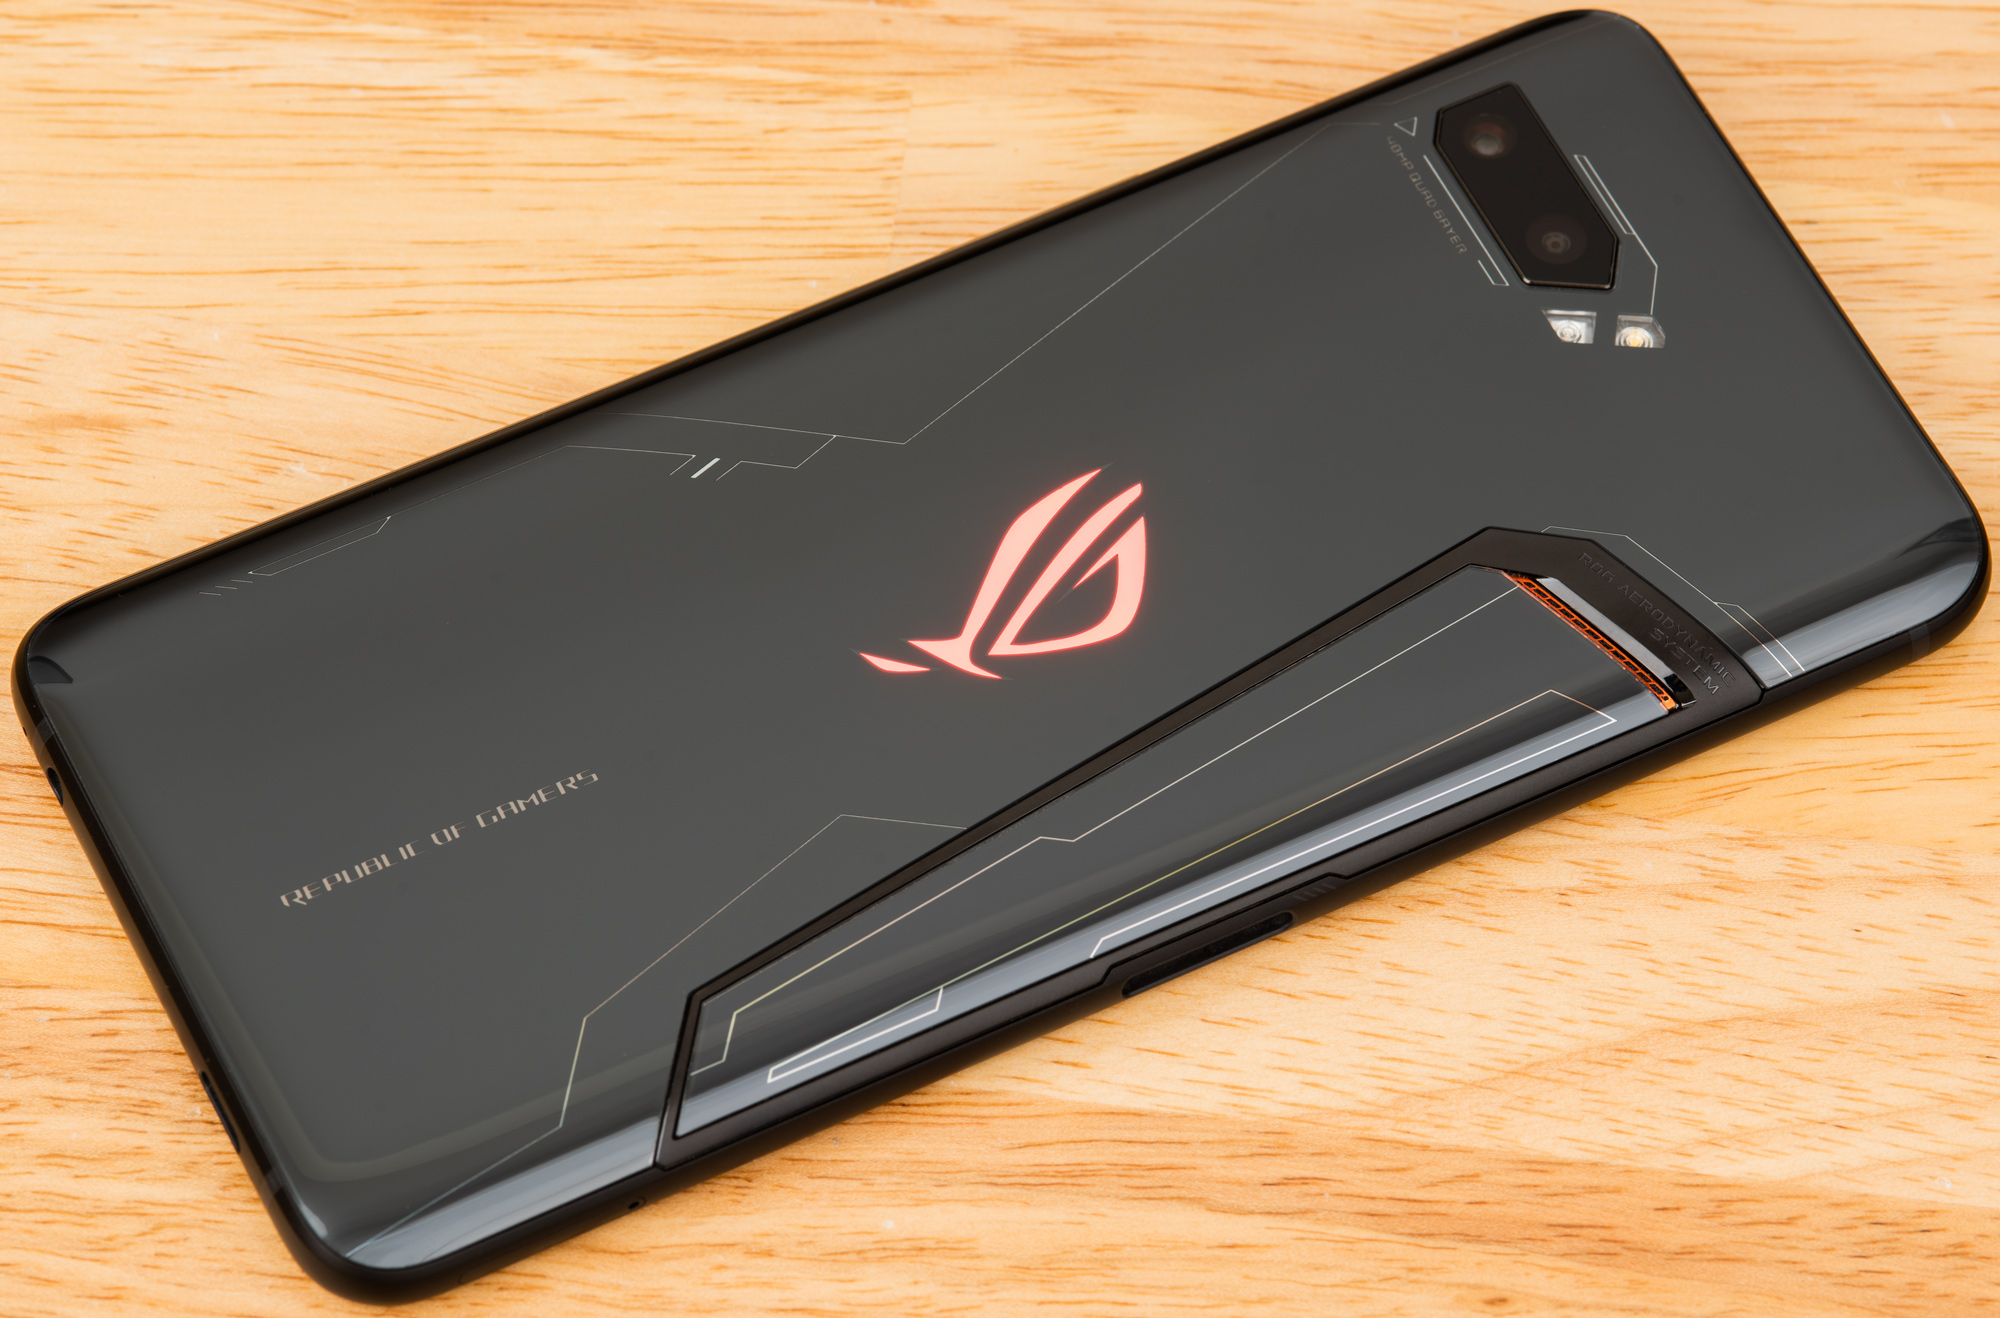 Tech Today - Honor Play 3, Asus ROG Phone II, Exynos 980 and more